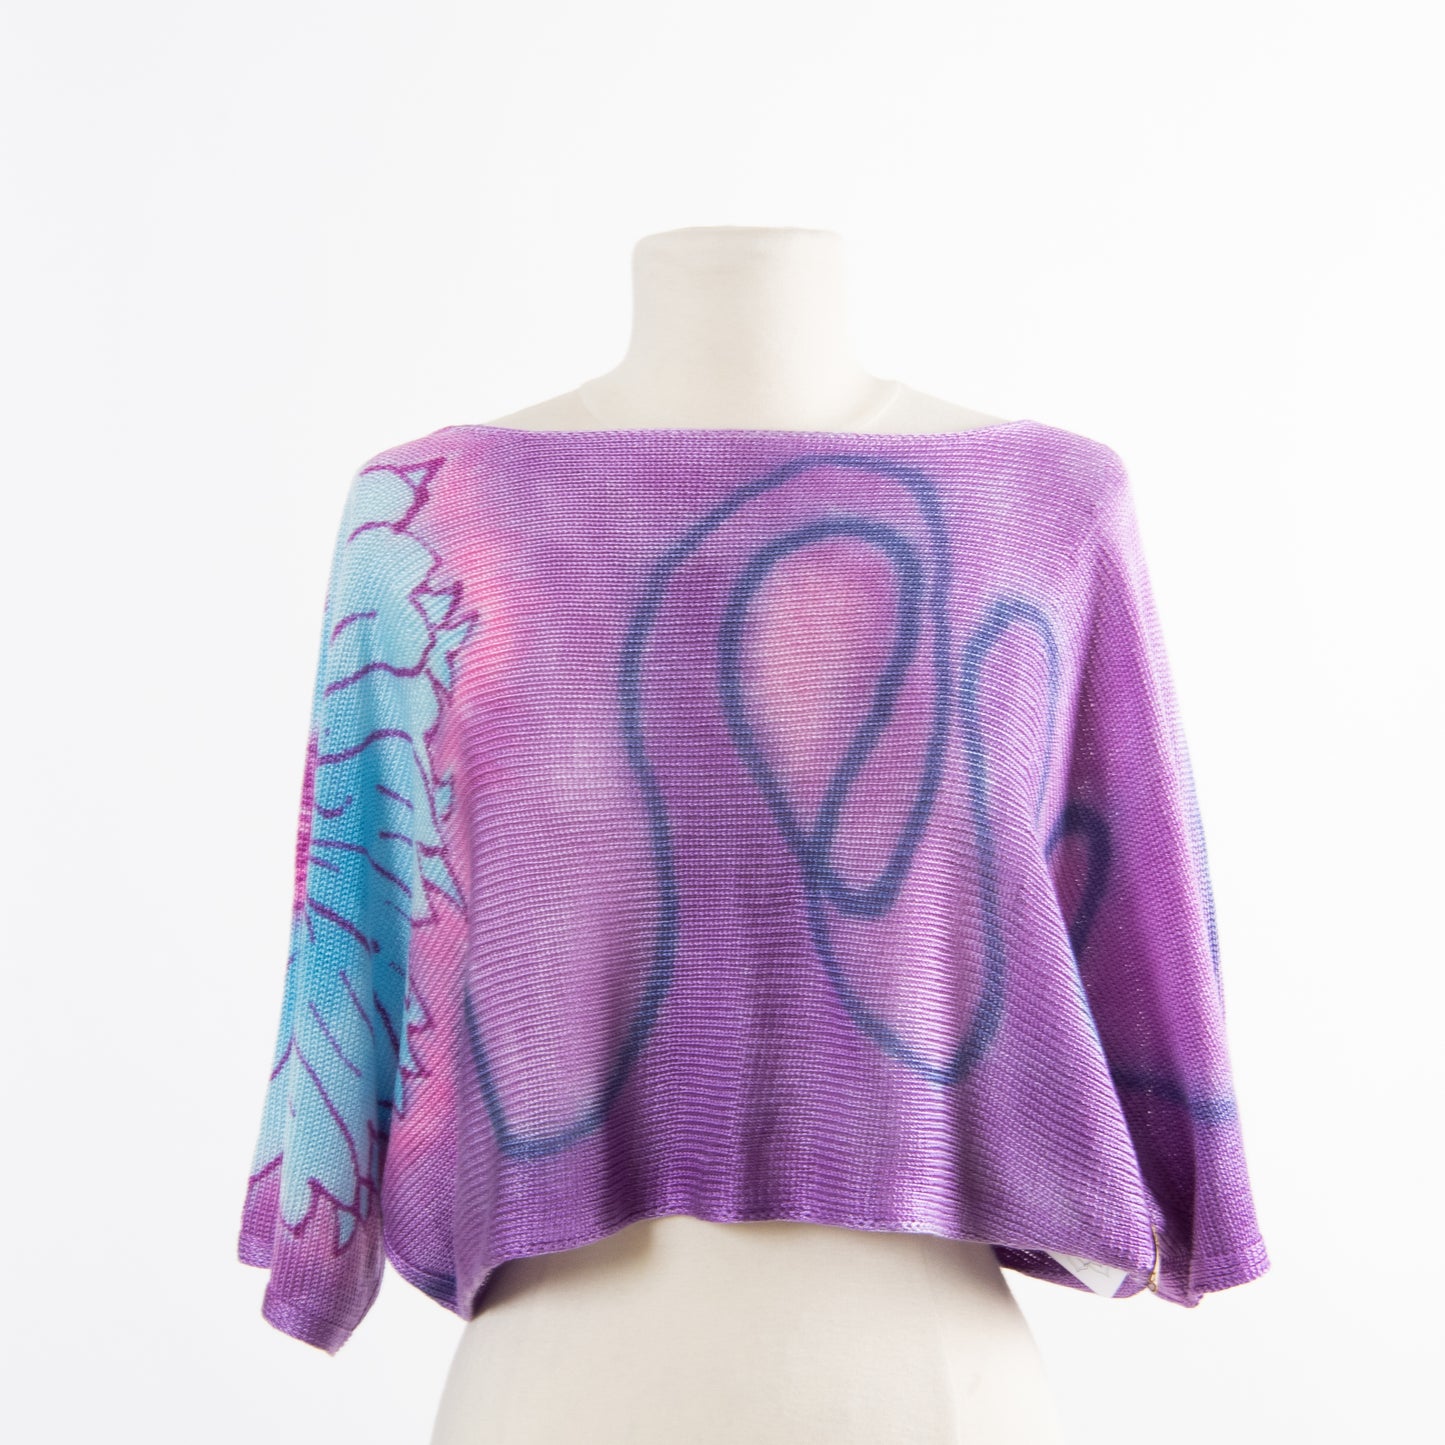 The Box Top - Hand Painted Sweater by Alison Gauthier